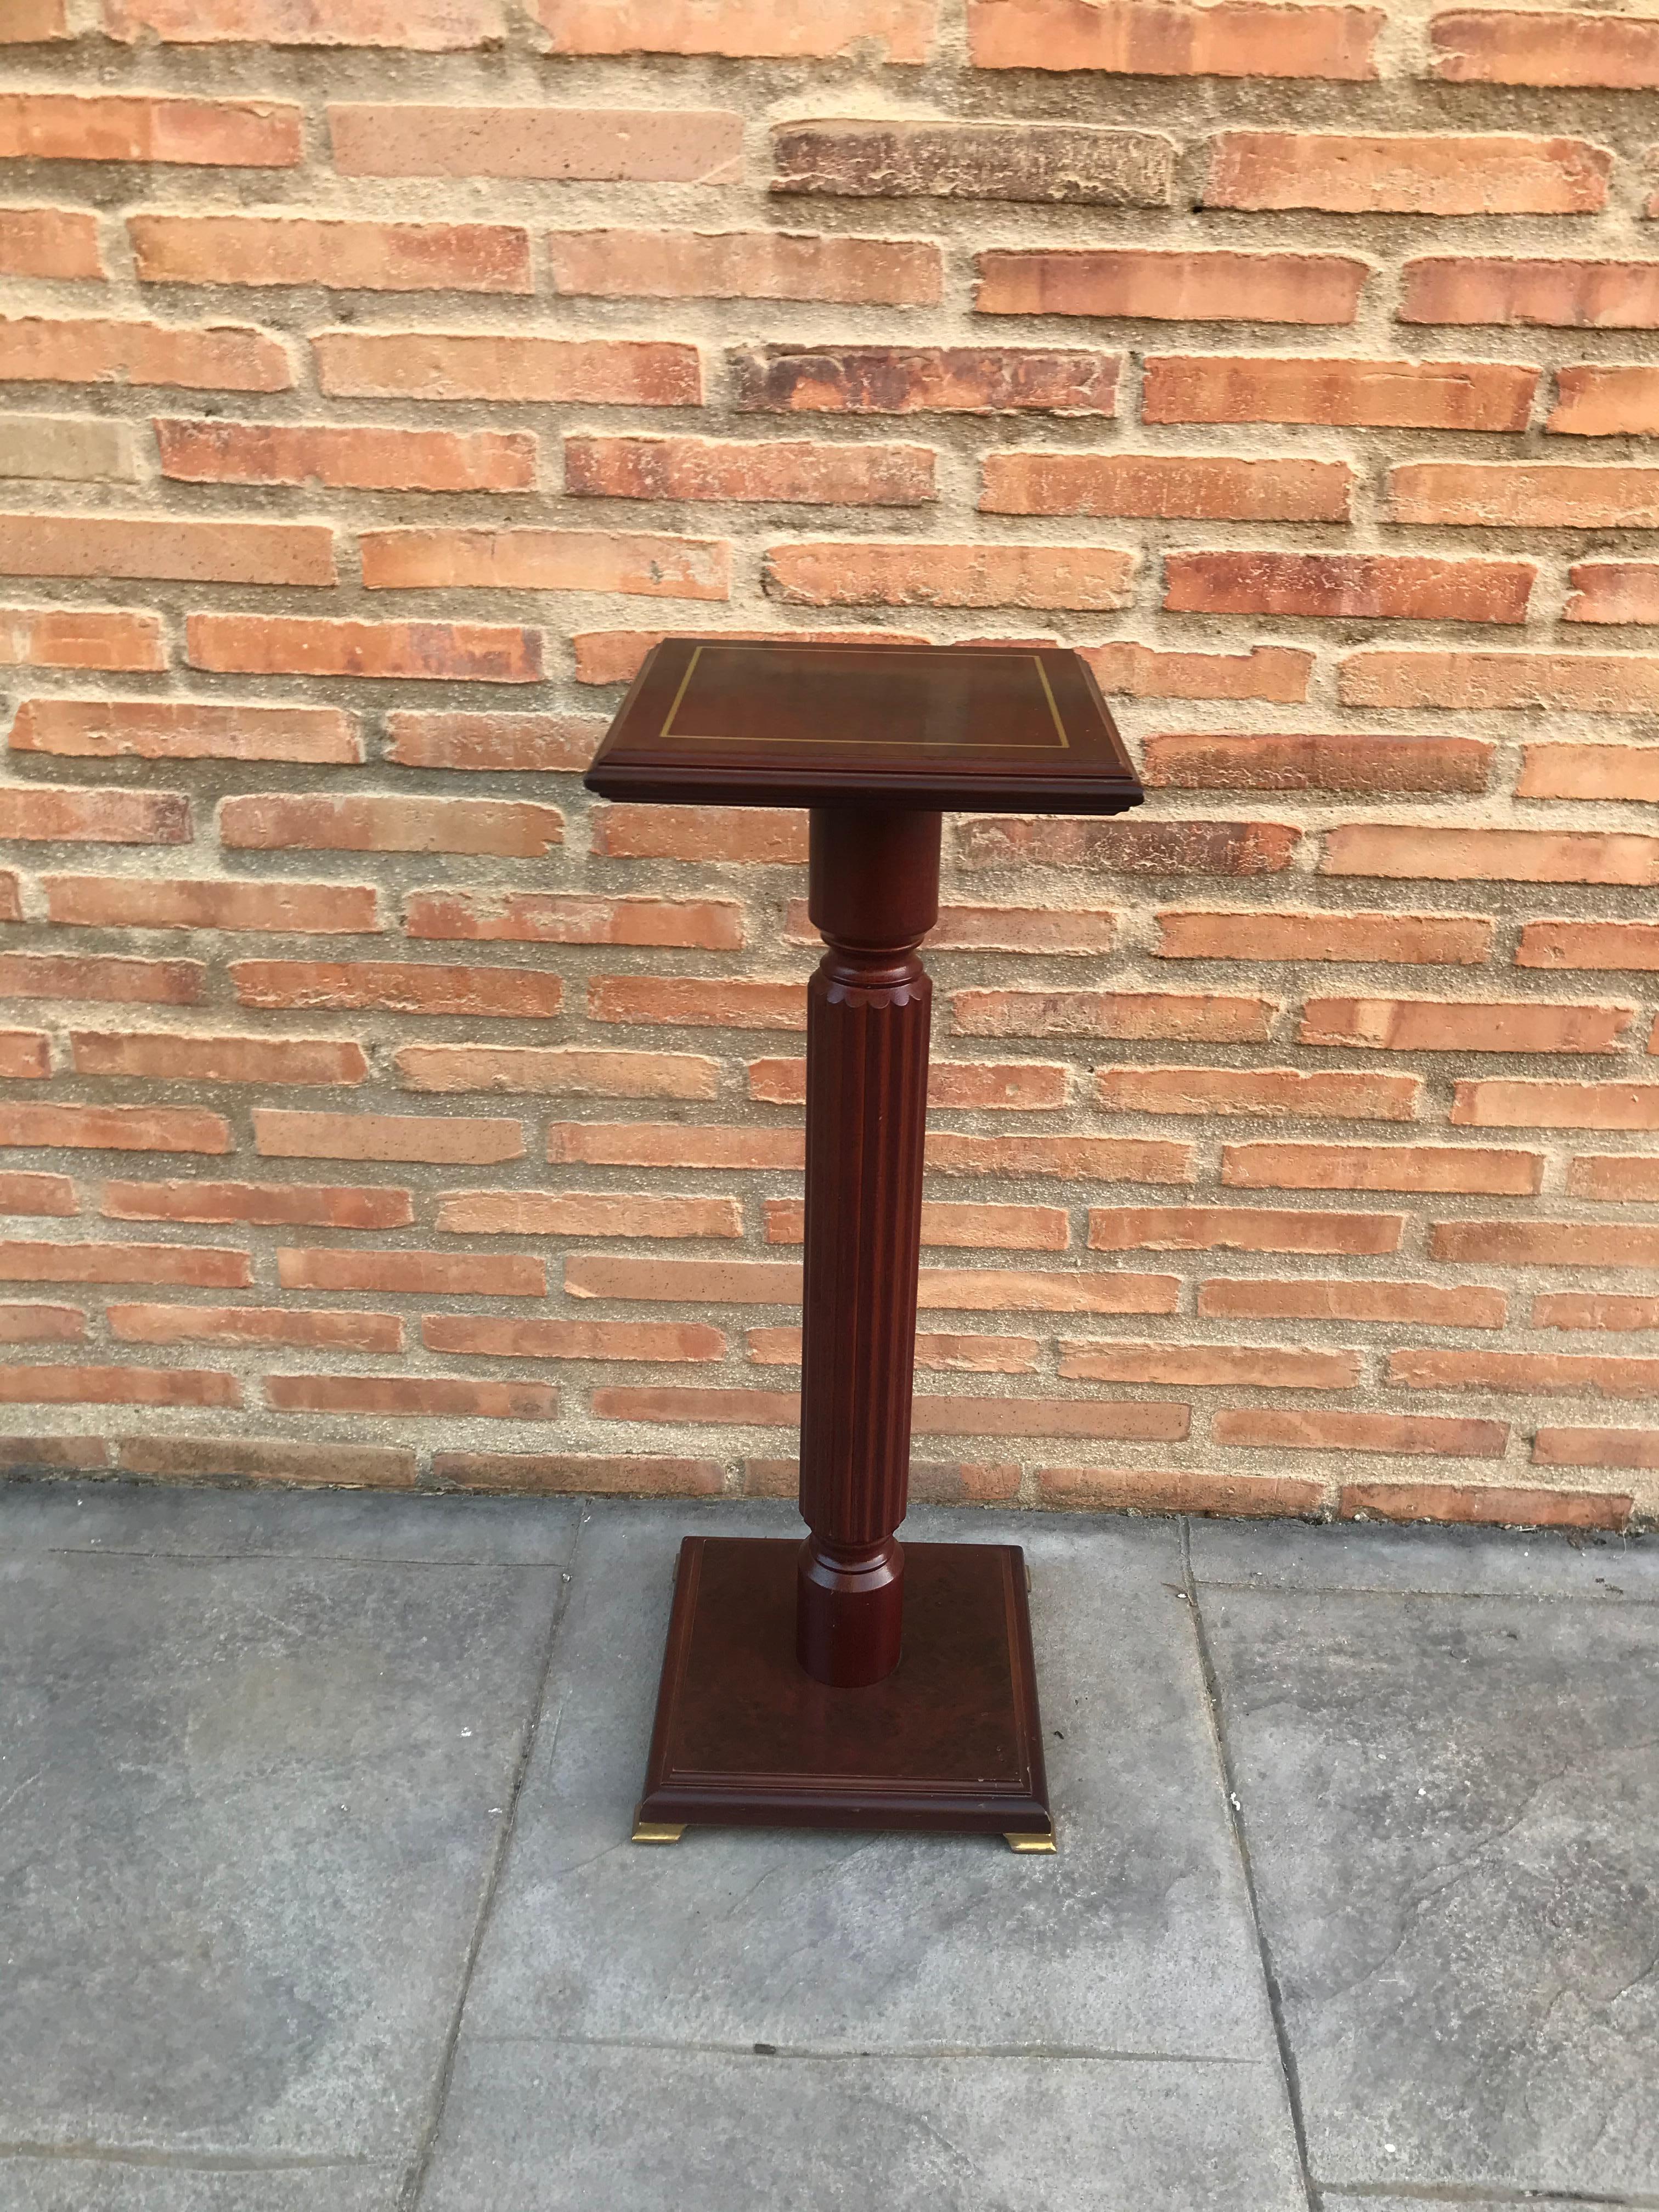 Mid-20th century mahogany wood square top pedestal table with marquetry inlay top.